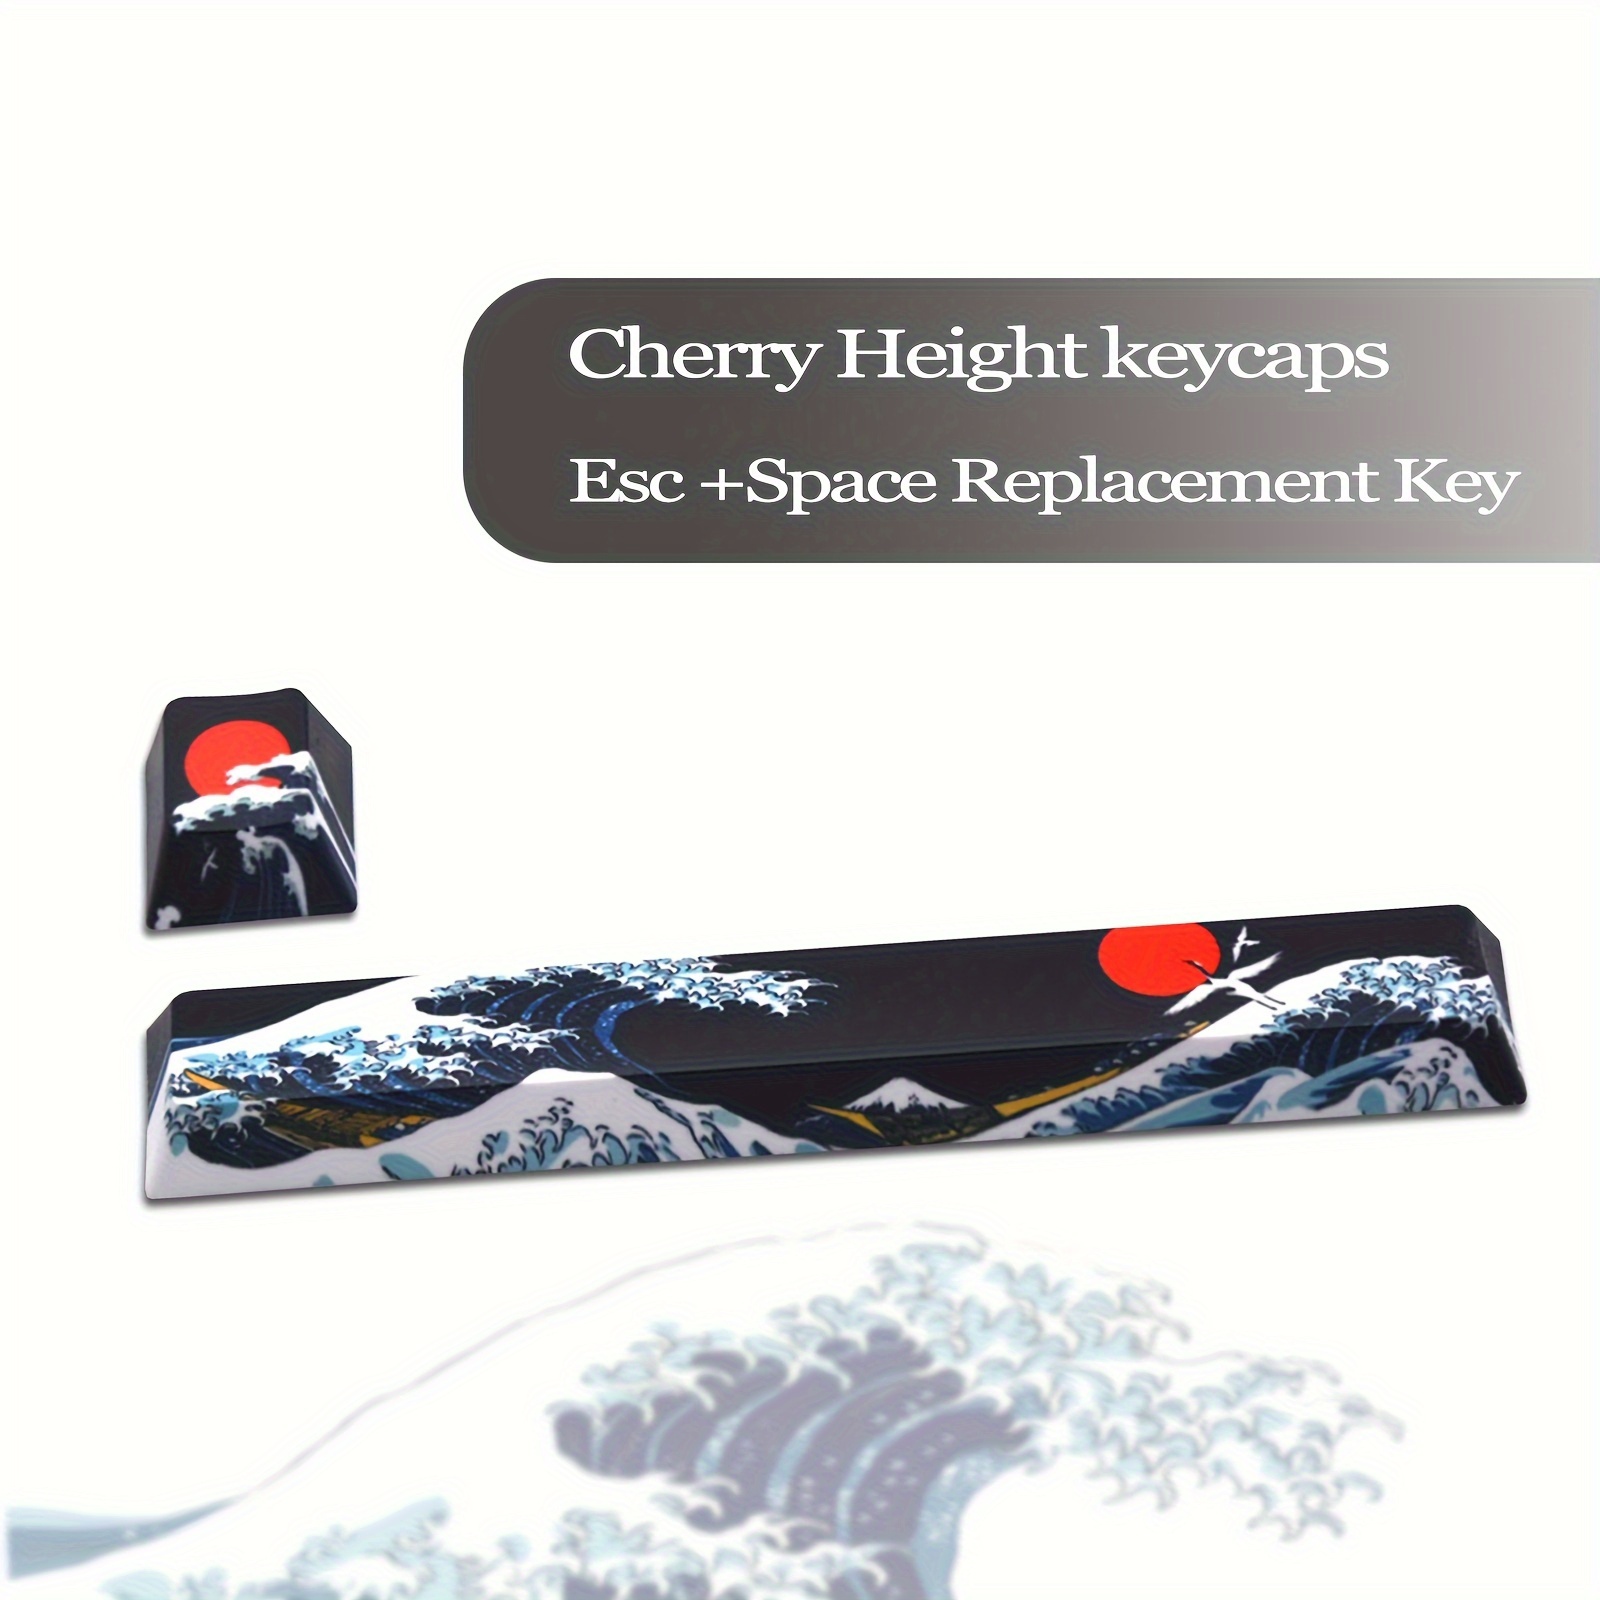 

Keycaps (2 Pcs), Pbt Thermal Sublimation Keycaps, Esc Space Replacement Key, Cherry Height Kanagawa Keycaps